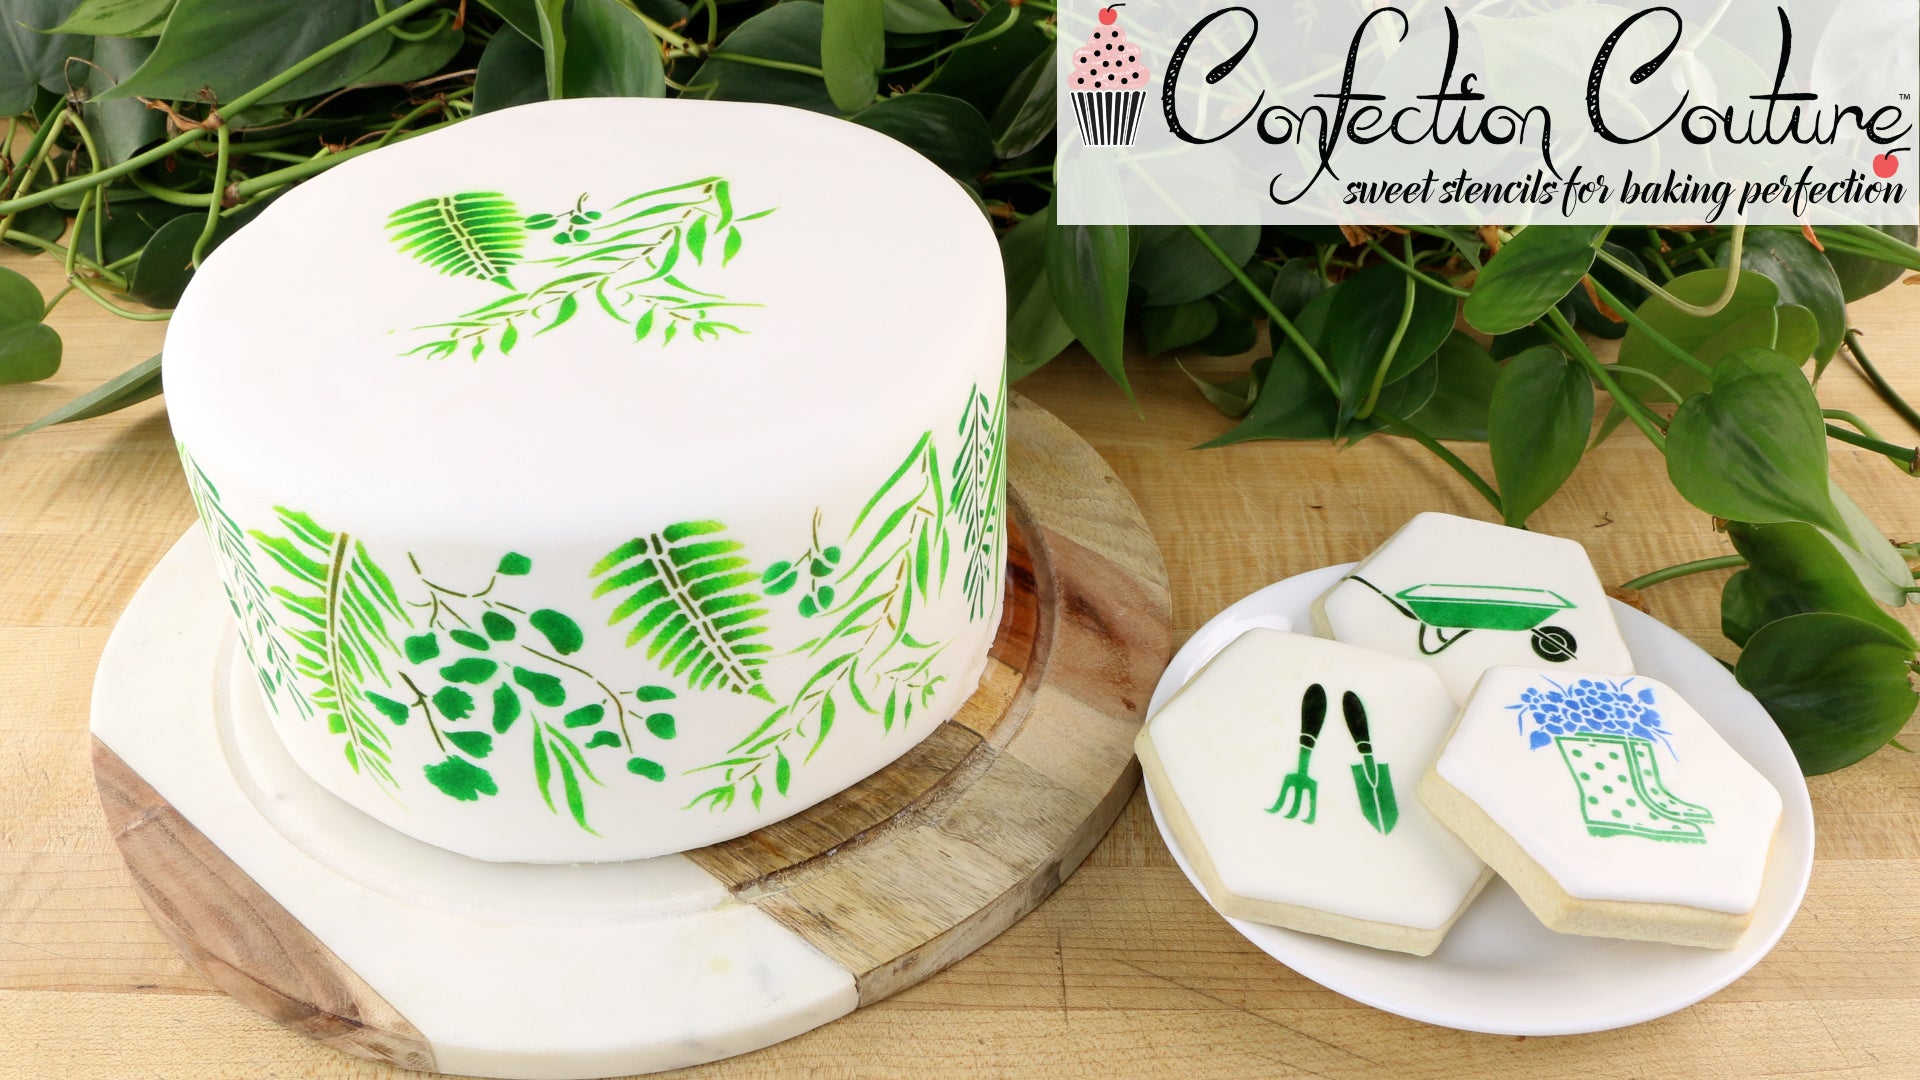 Stenciling on a Cake with Royal icing / Stenciling Fondant Cake